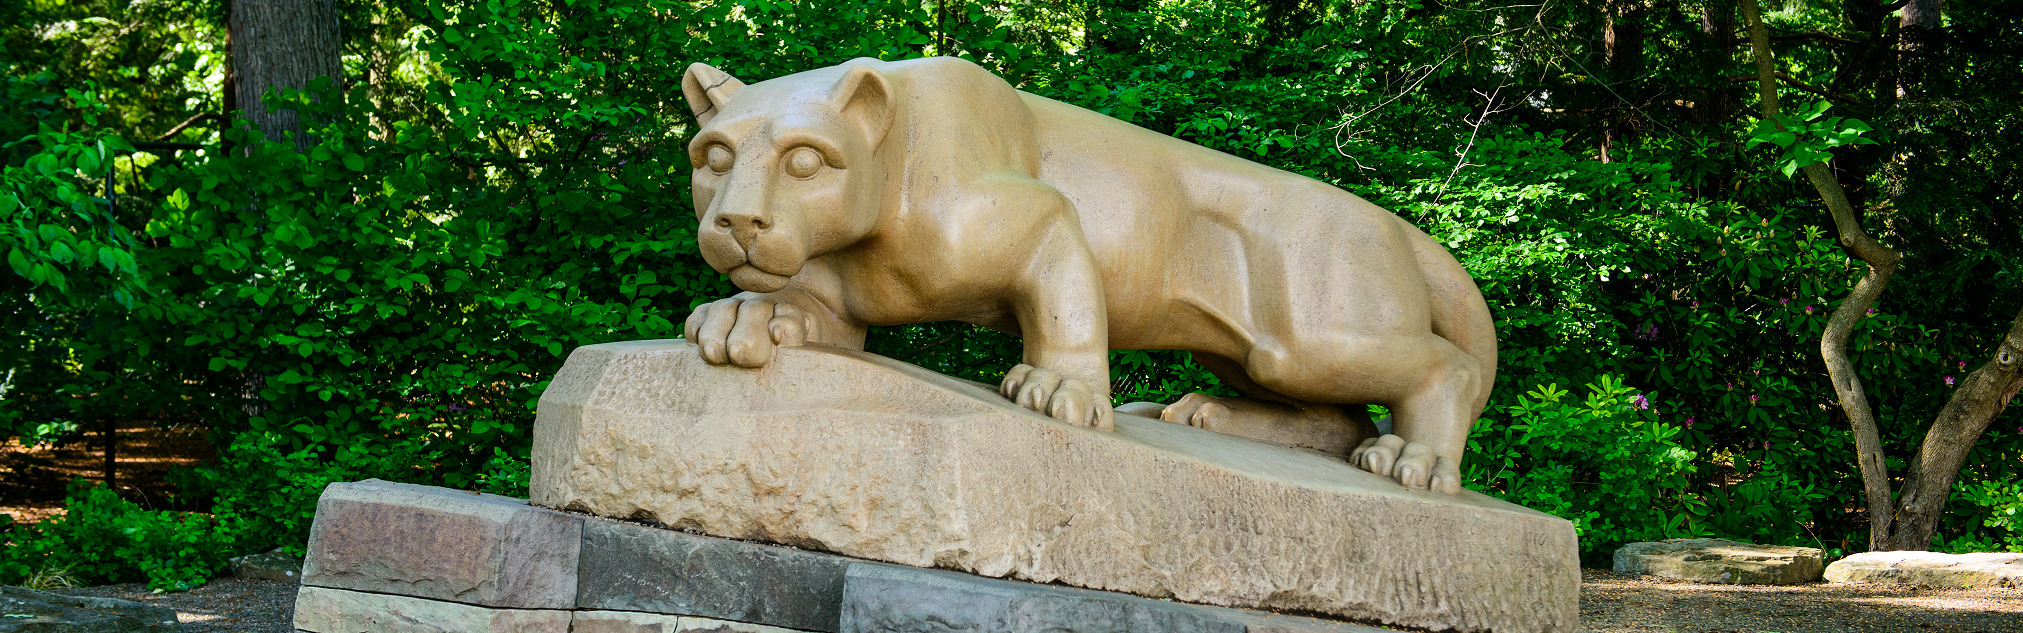 Photograph of the Nittany Lion Statue on Penn State University's University Park Campus